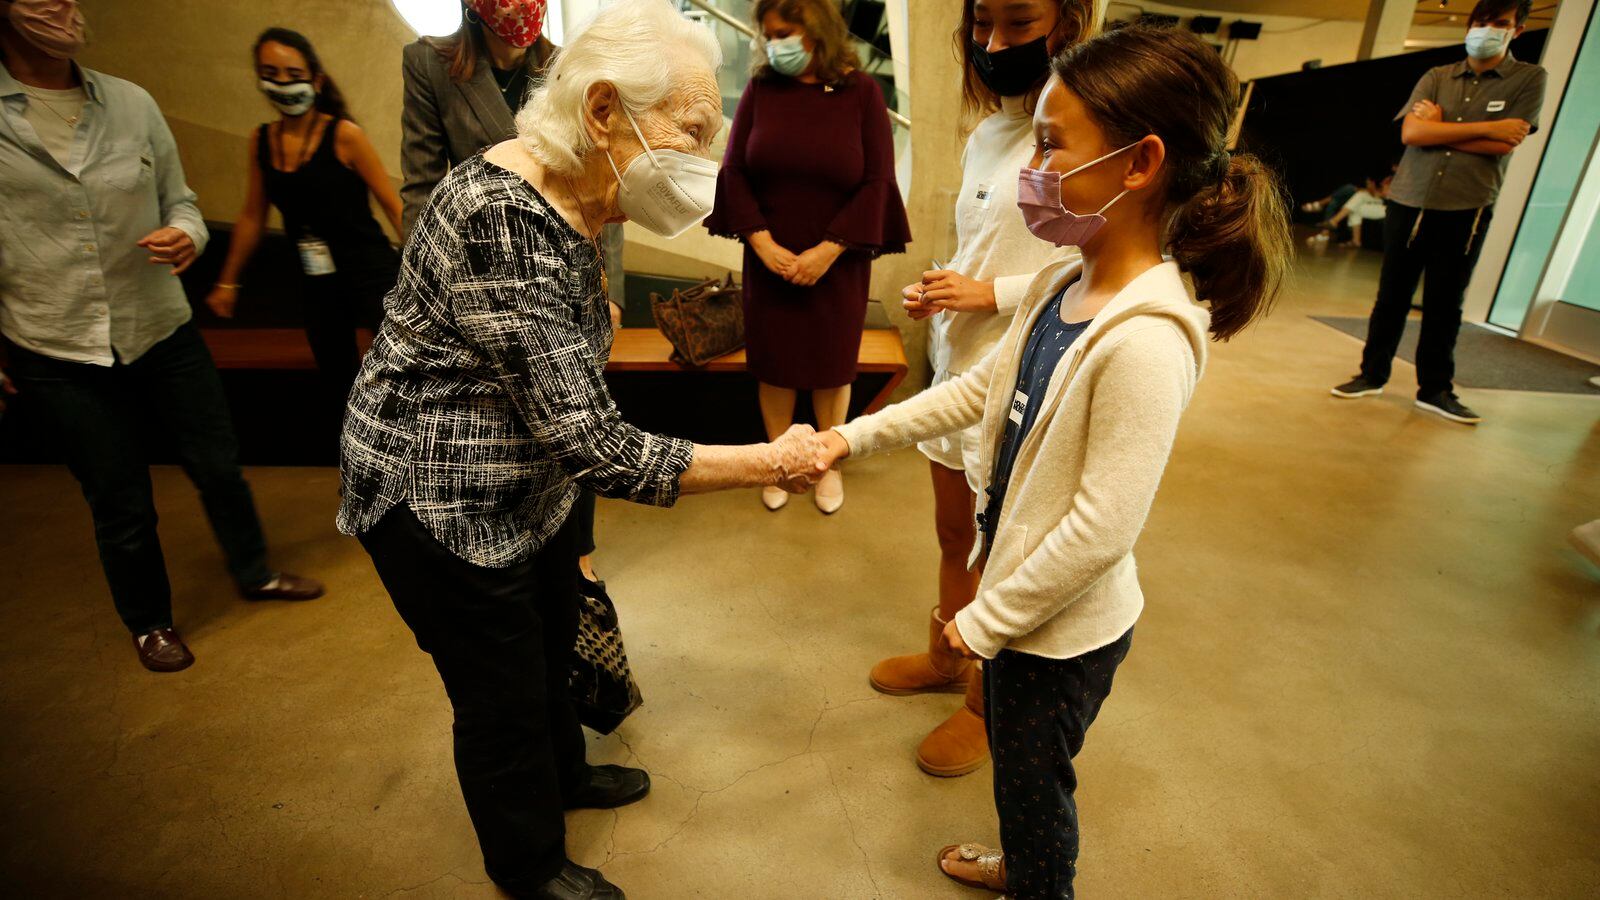 An elderly woman shakes hands with a girl and they make eye contact both wearing masks